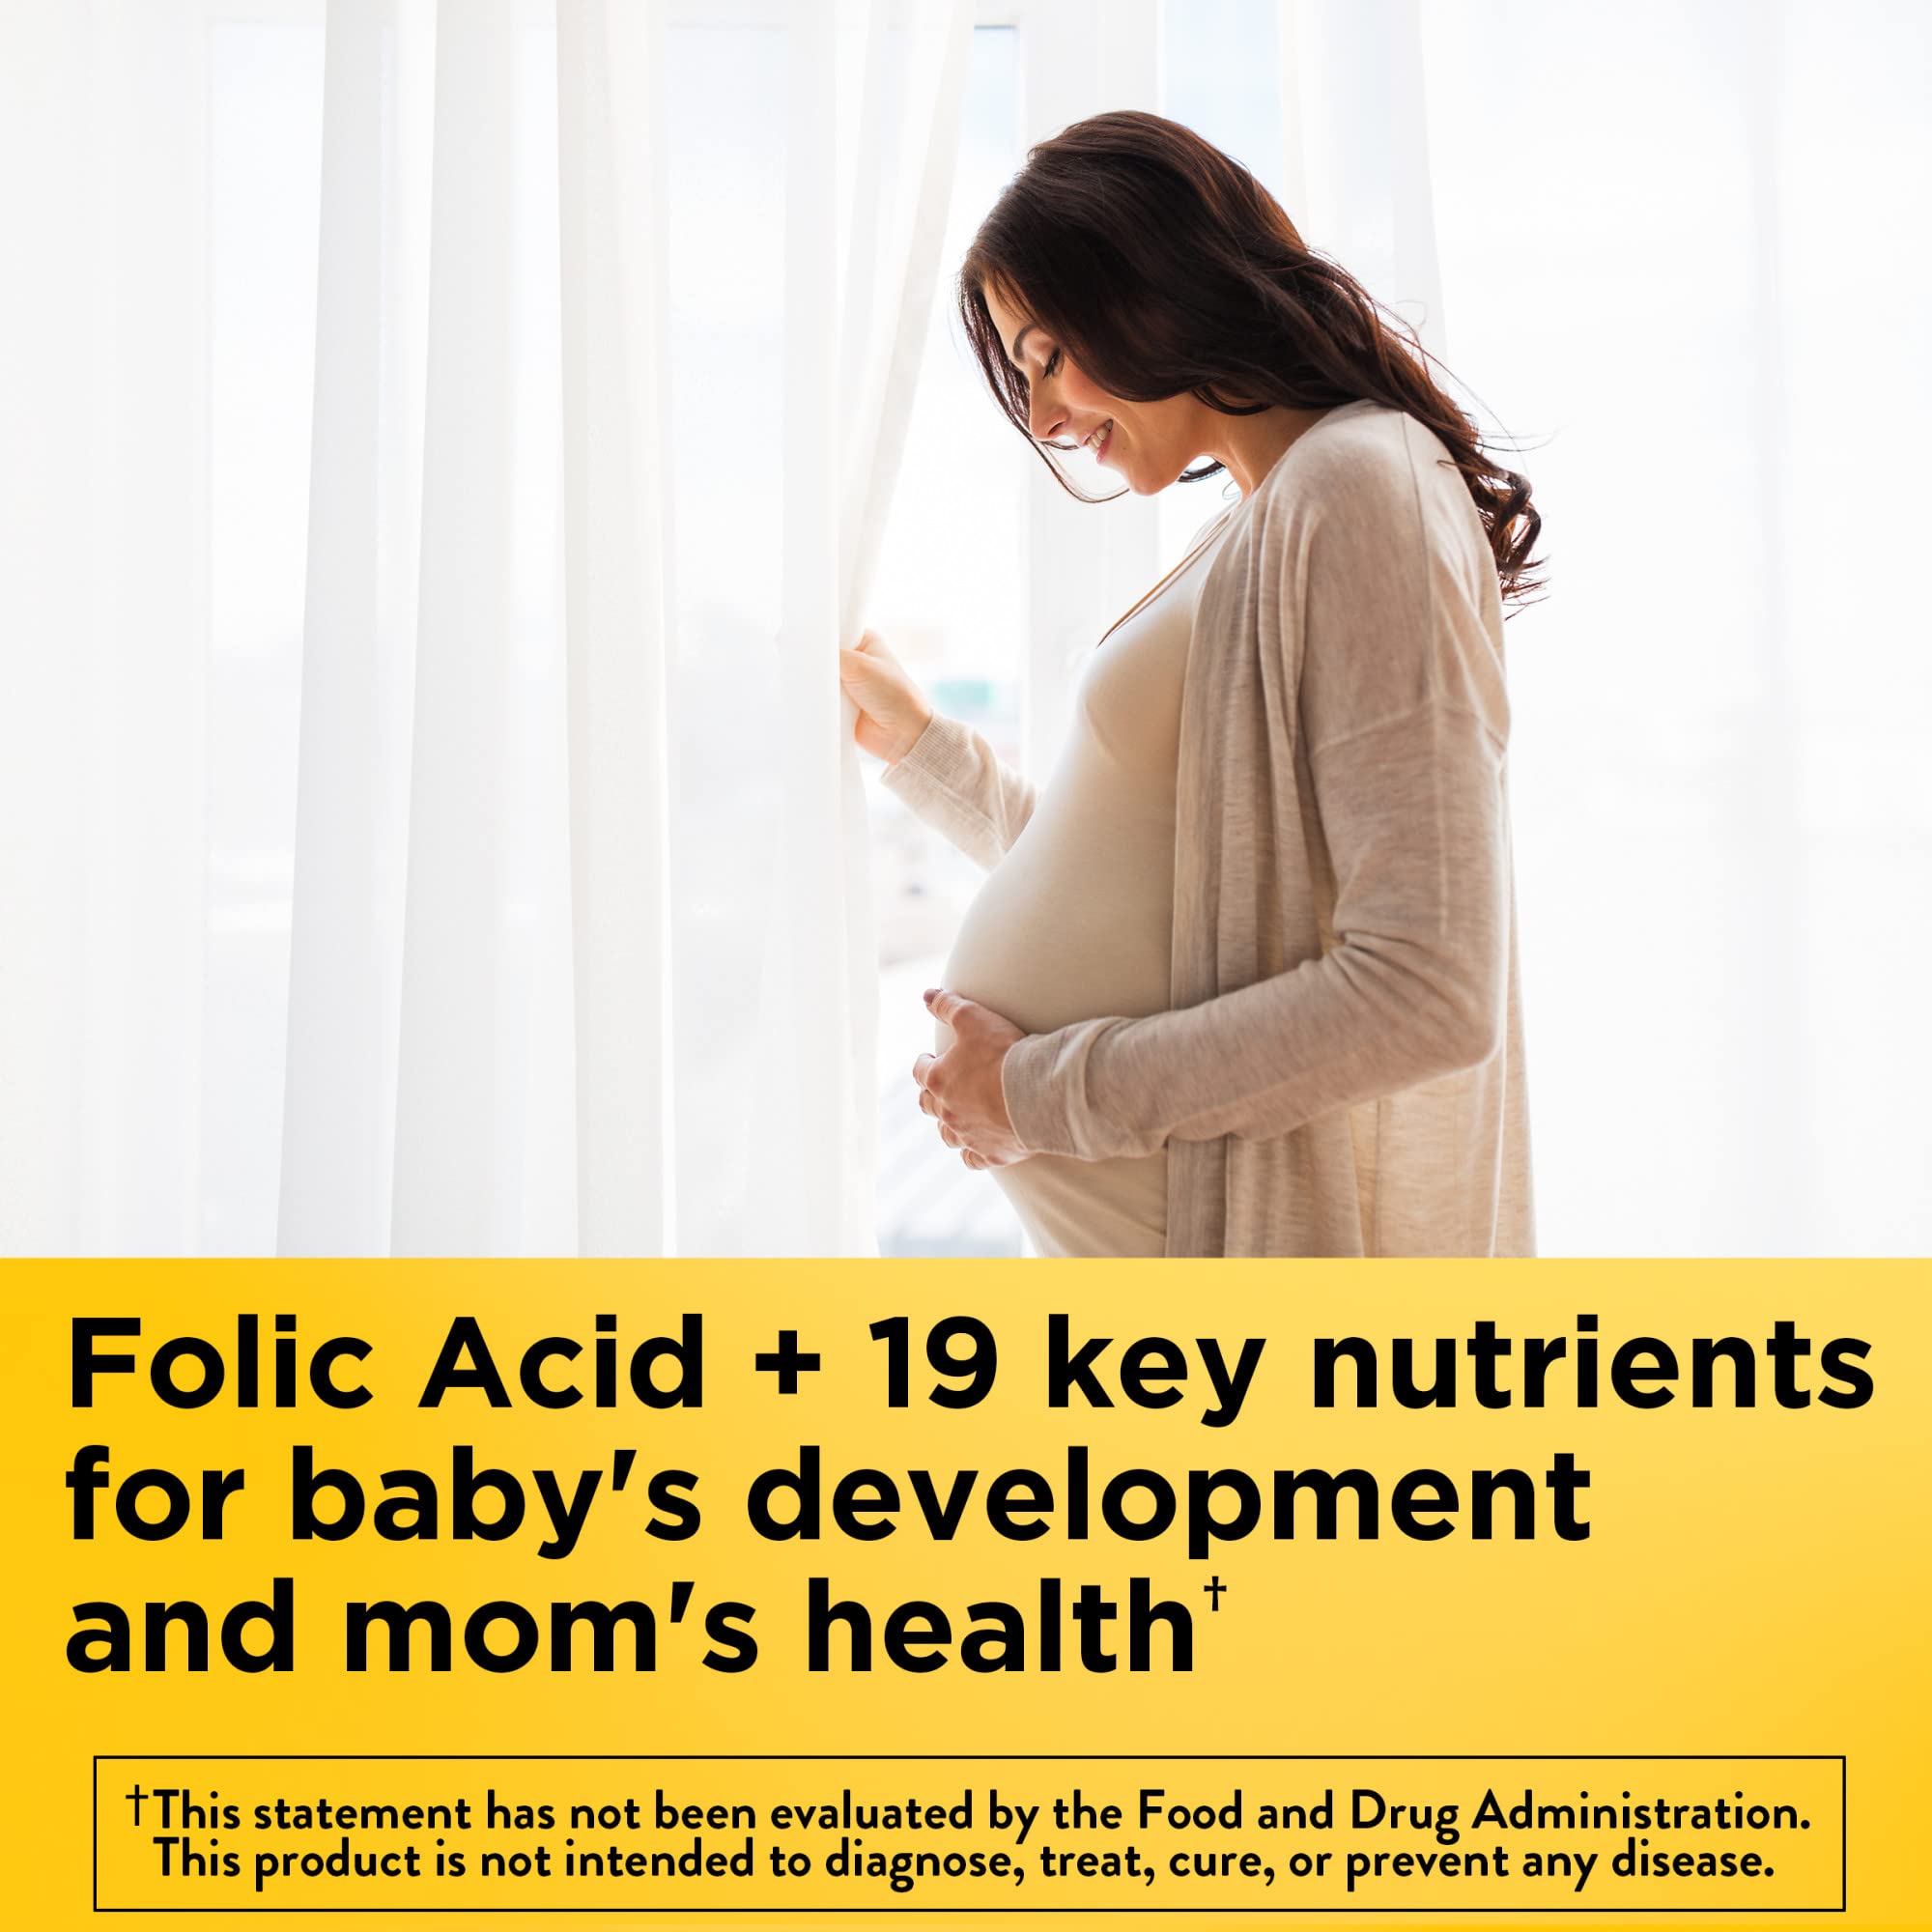 Nature Made Prenatal with Folic Acid + DHA, Prenatal Vitamin and Mineral Supplement for Daily Nutritional Support, 110 Softgels, 110 Day Supply